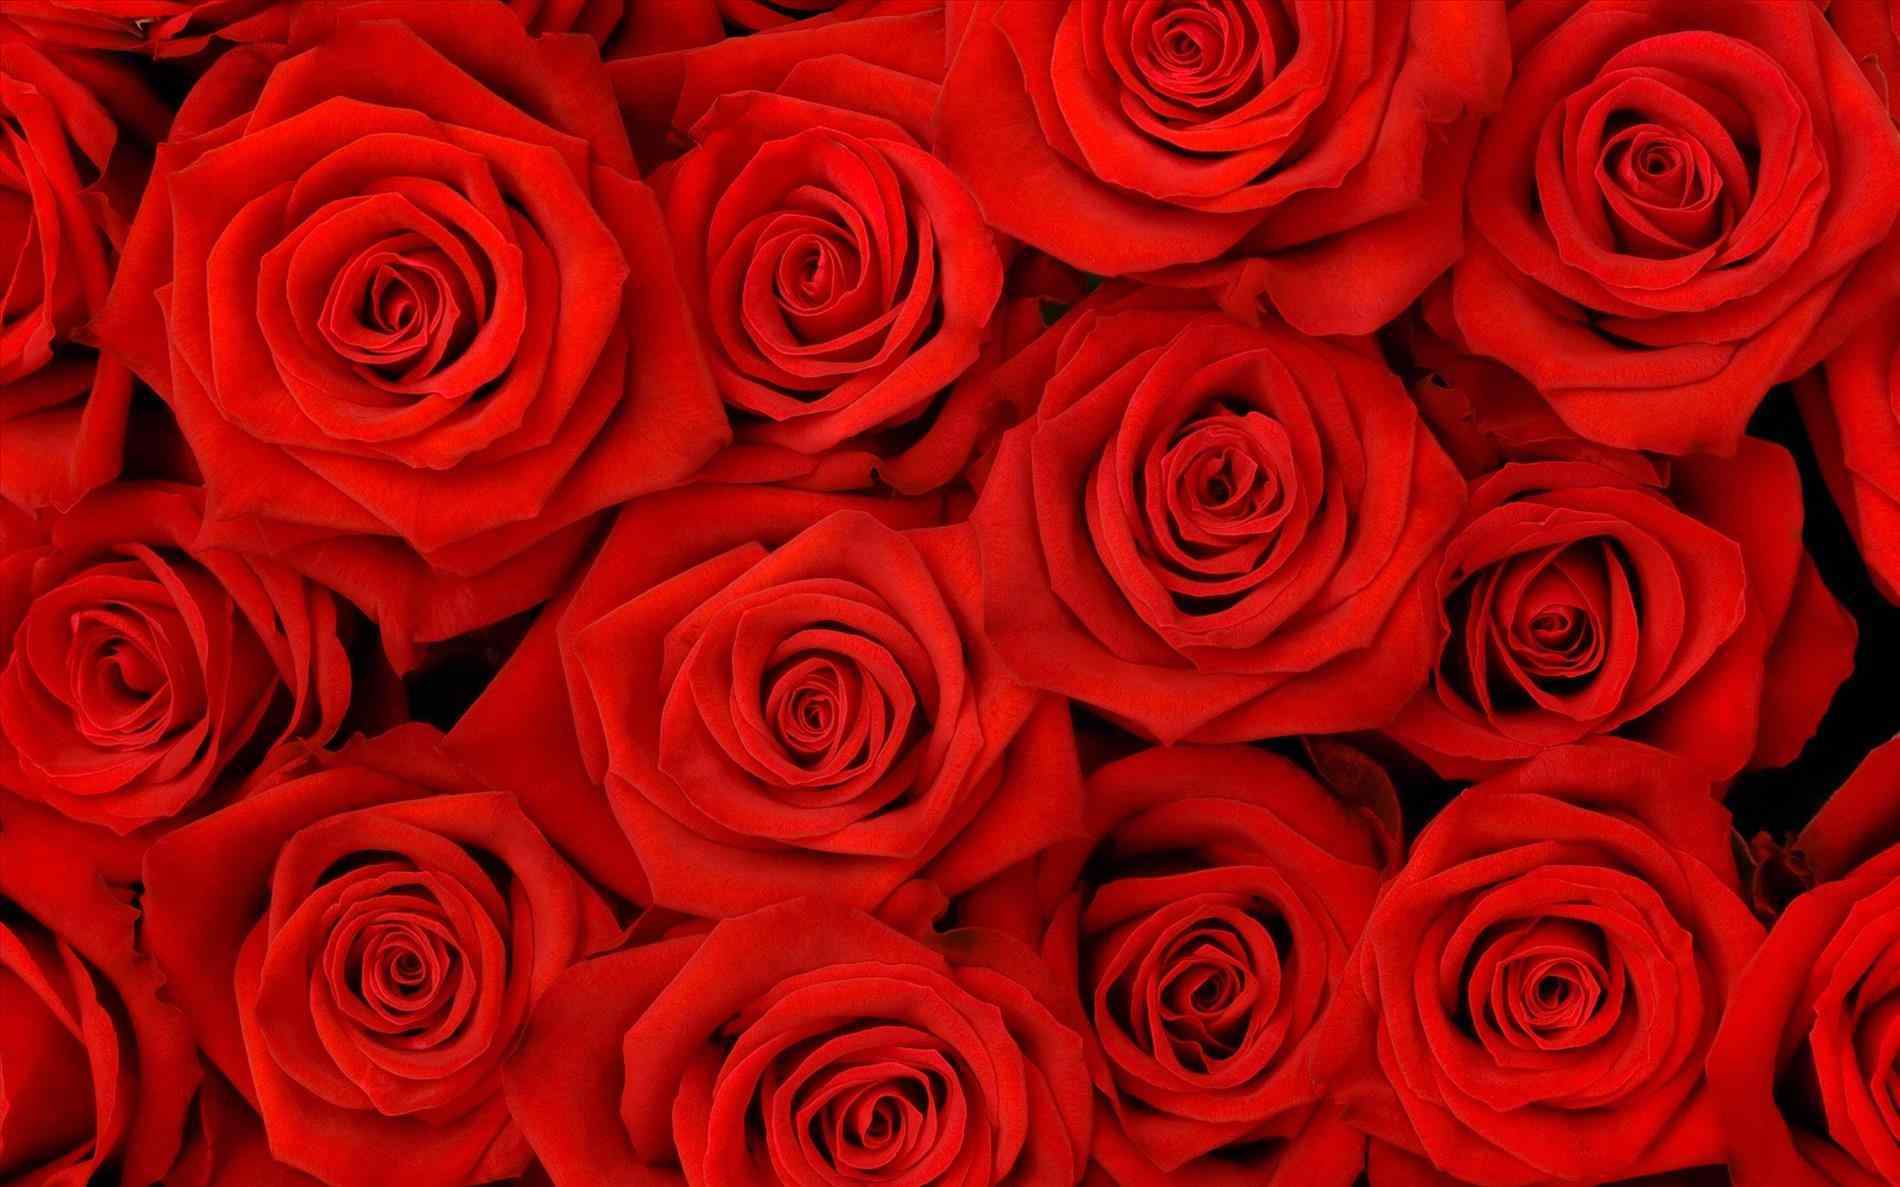 Red Roses Background Tumblr. Your Meme Source